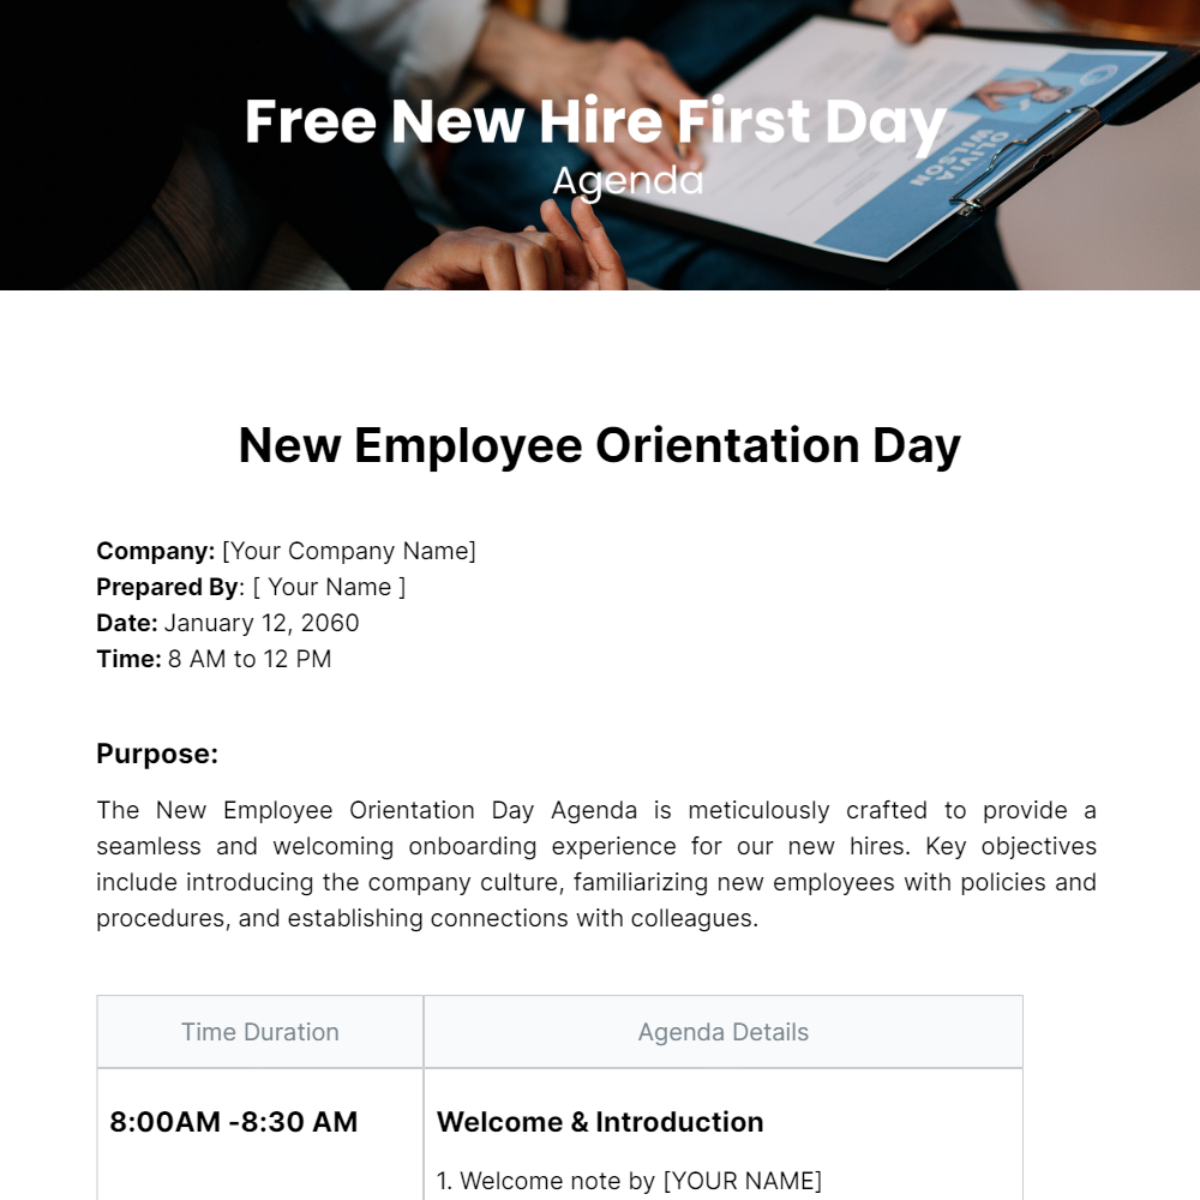 New Hire First Day Agenda  Template